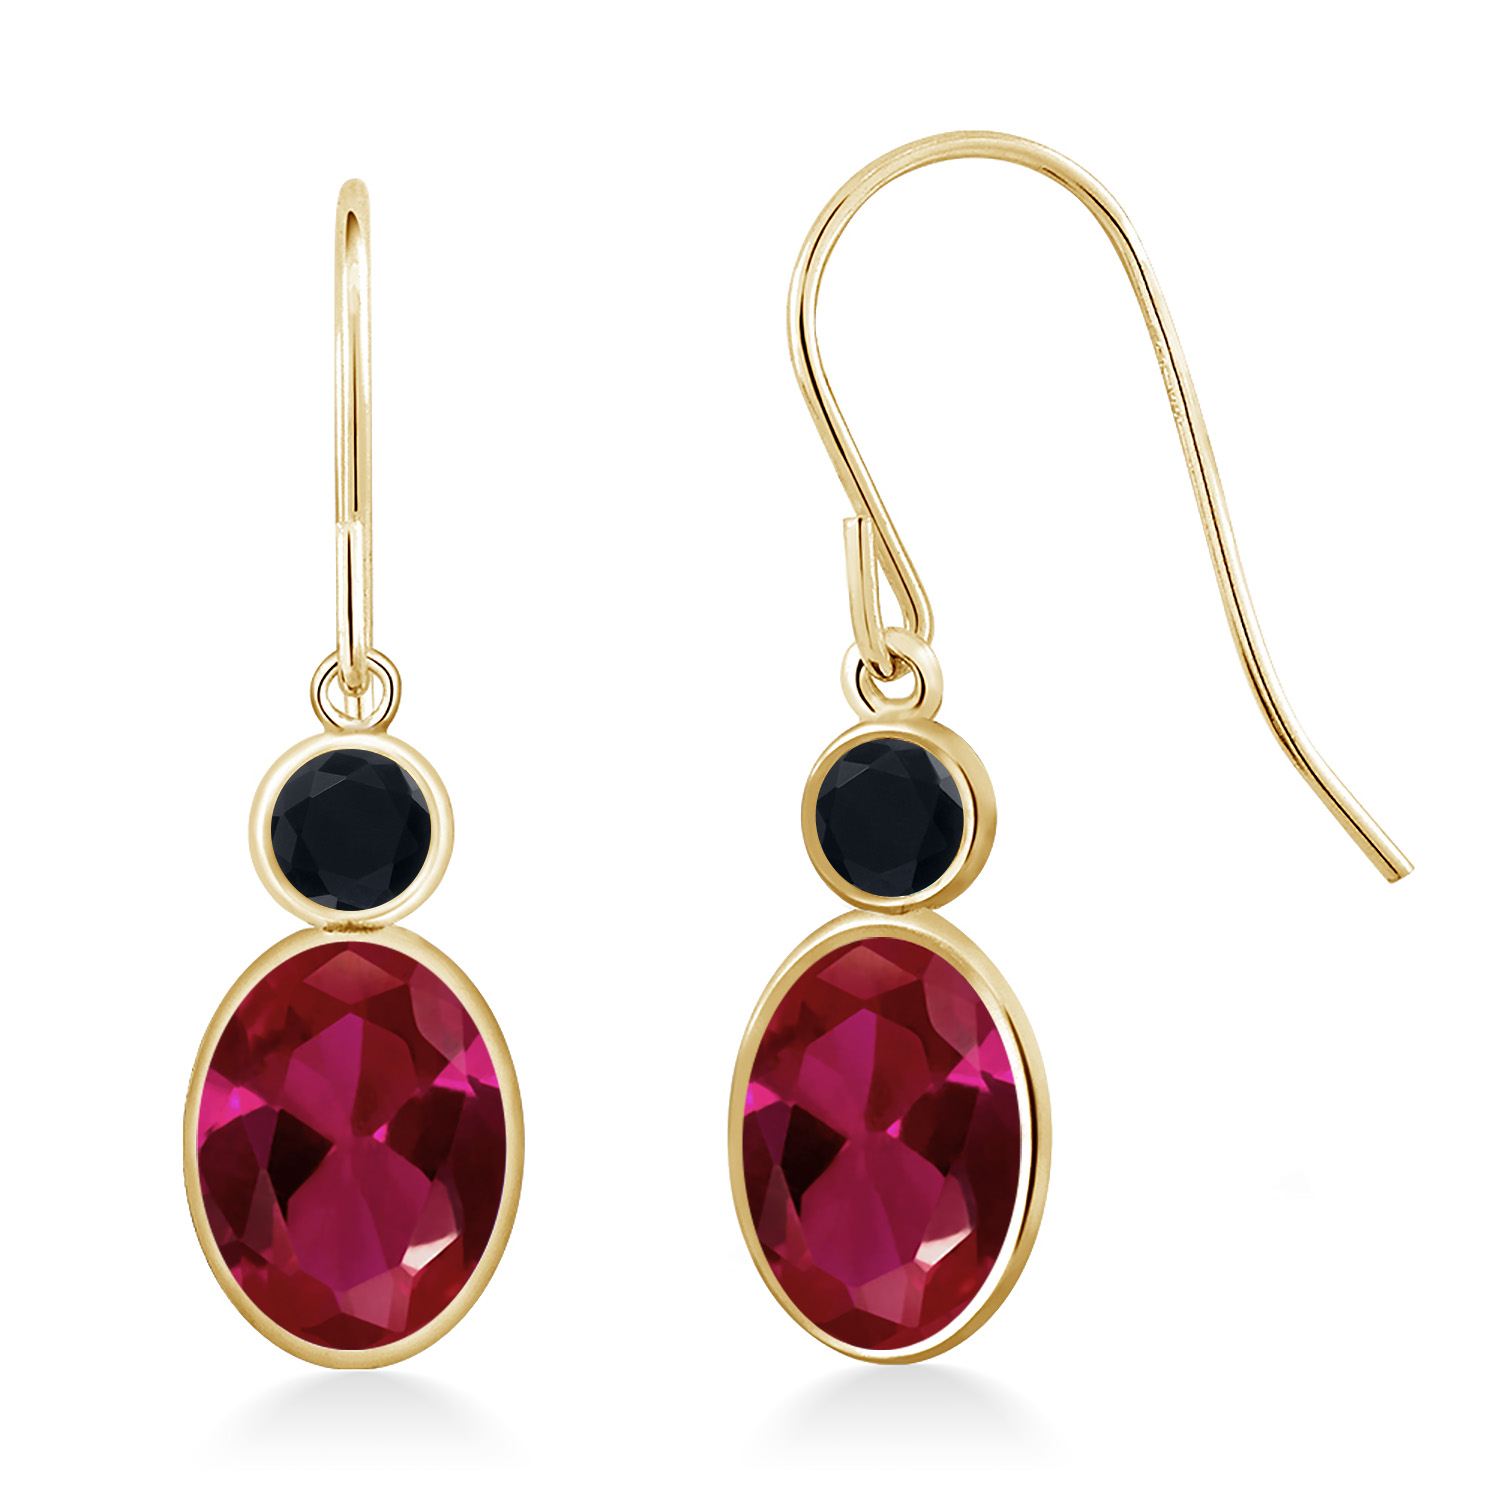 Gem Stone King 1.90 Ct Oval Red Created Ruby Black Onyx 14K Yellow Gold Earrings